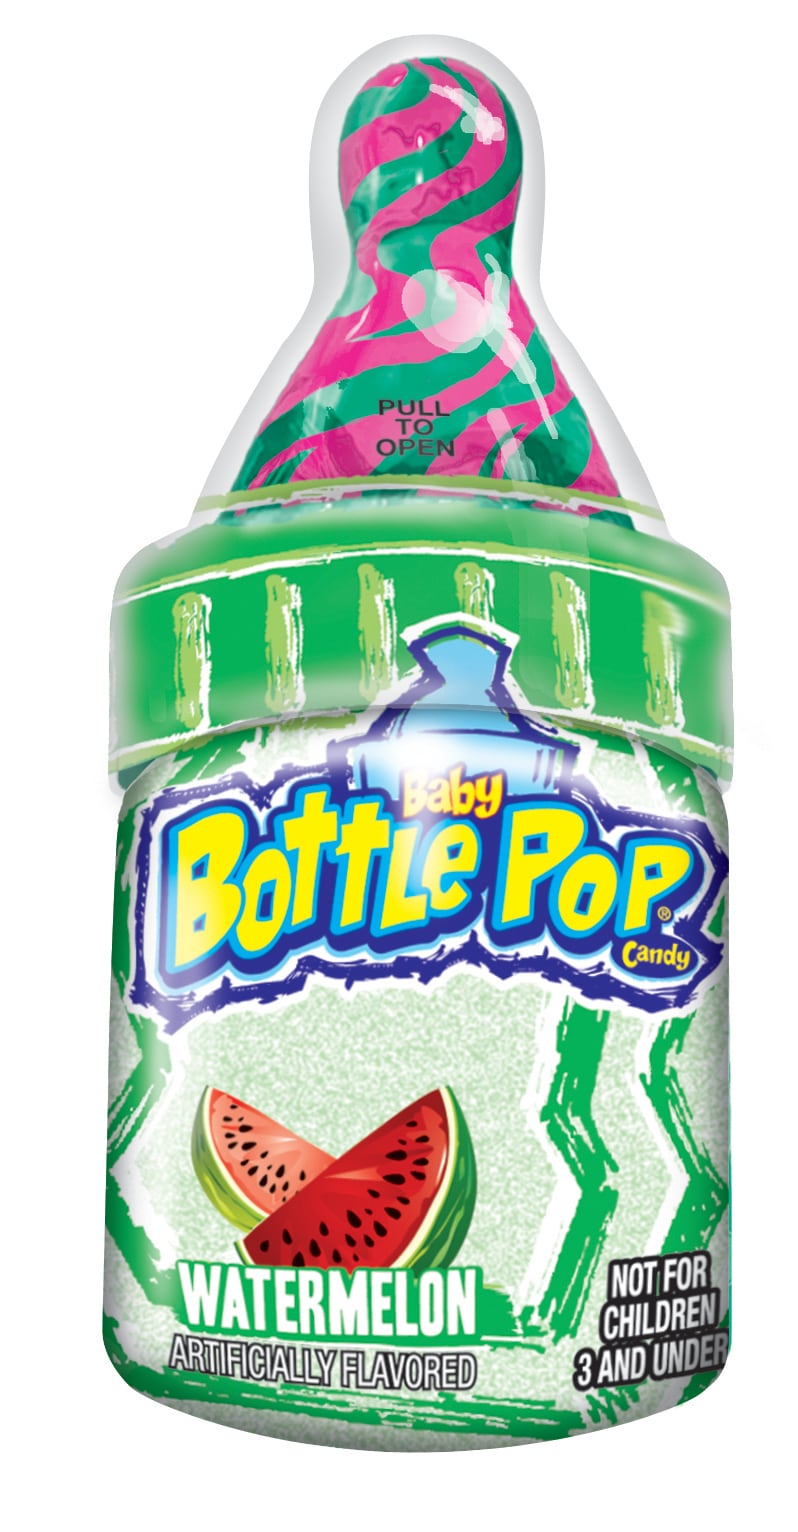 Baby Bottle Pop Assorted Confections-Hard, 1.1-oz - Great Snack